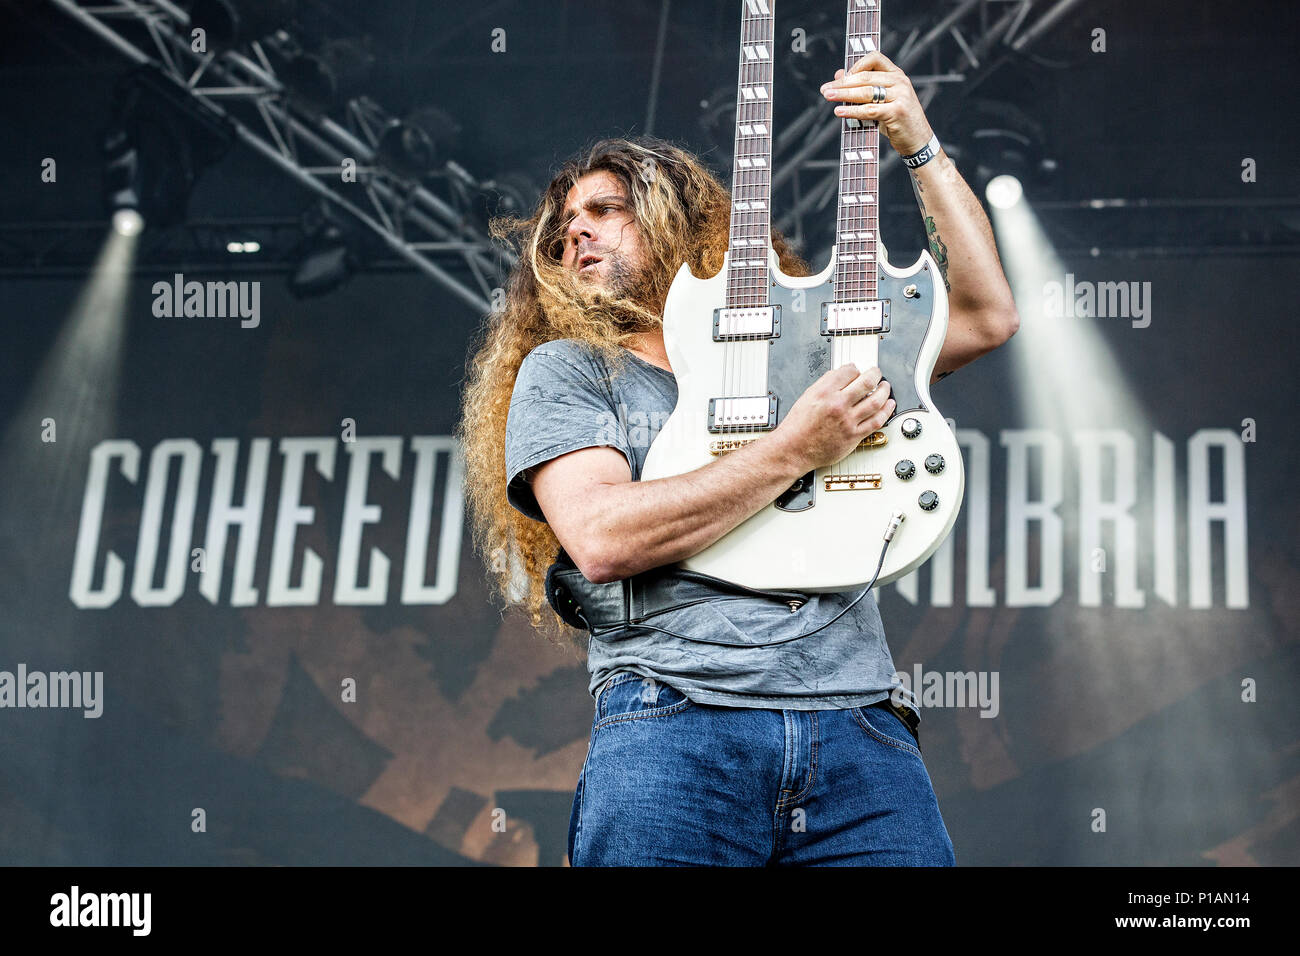 Sweden, Solvesborg - June 08, 2017. Coheed and Cambria, the American progressive rock band, performs a live concert during the Swedish music festival Sweden Rock Festival 2017 in Blekinge. Here guitarist Claudio Sanchez is seen live on stage. (Photo credit: Gonzales Photo - Terje Dokken). Stock Photo